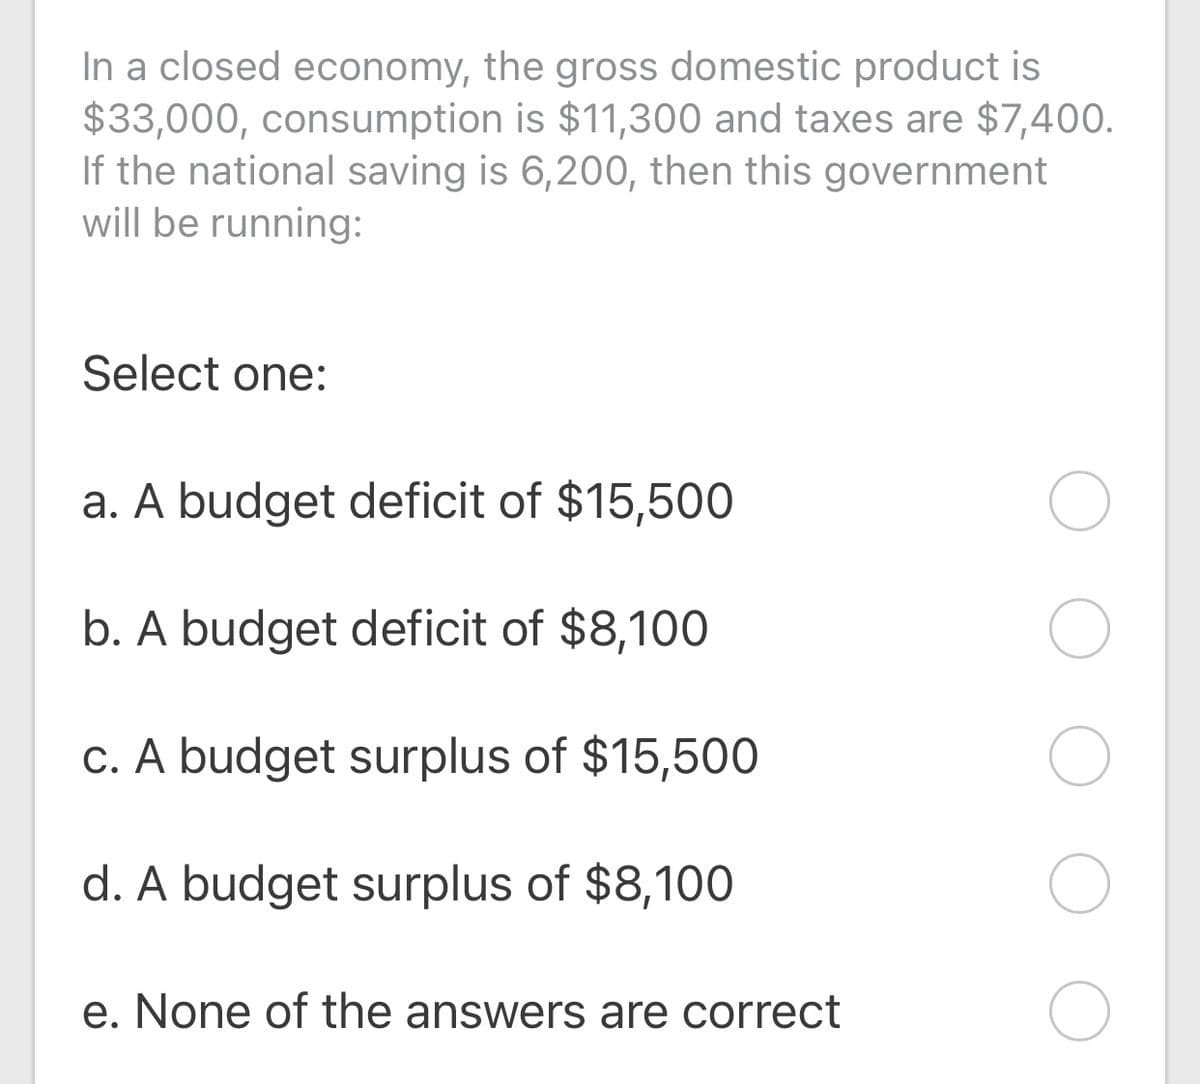 In a closed economy, the gross domestic product is
$33,000, consumption is $11,300 and taxes are $7,400.
If the national saving is 6,200, then this government
will be running:
Select one:
a. A budget deficit of $15,500
b. A budget deficit of $8,100
c. A budget surplus of $15,500
d. A budget surplus of $8,100
e. None of the answers are correct
